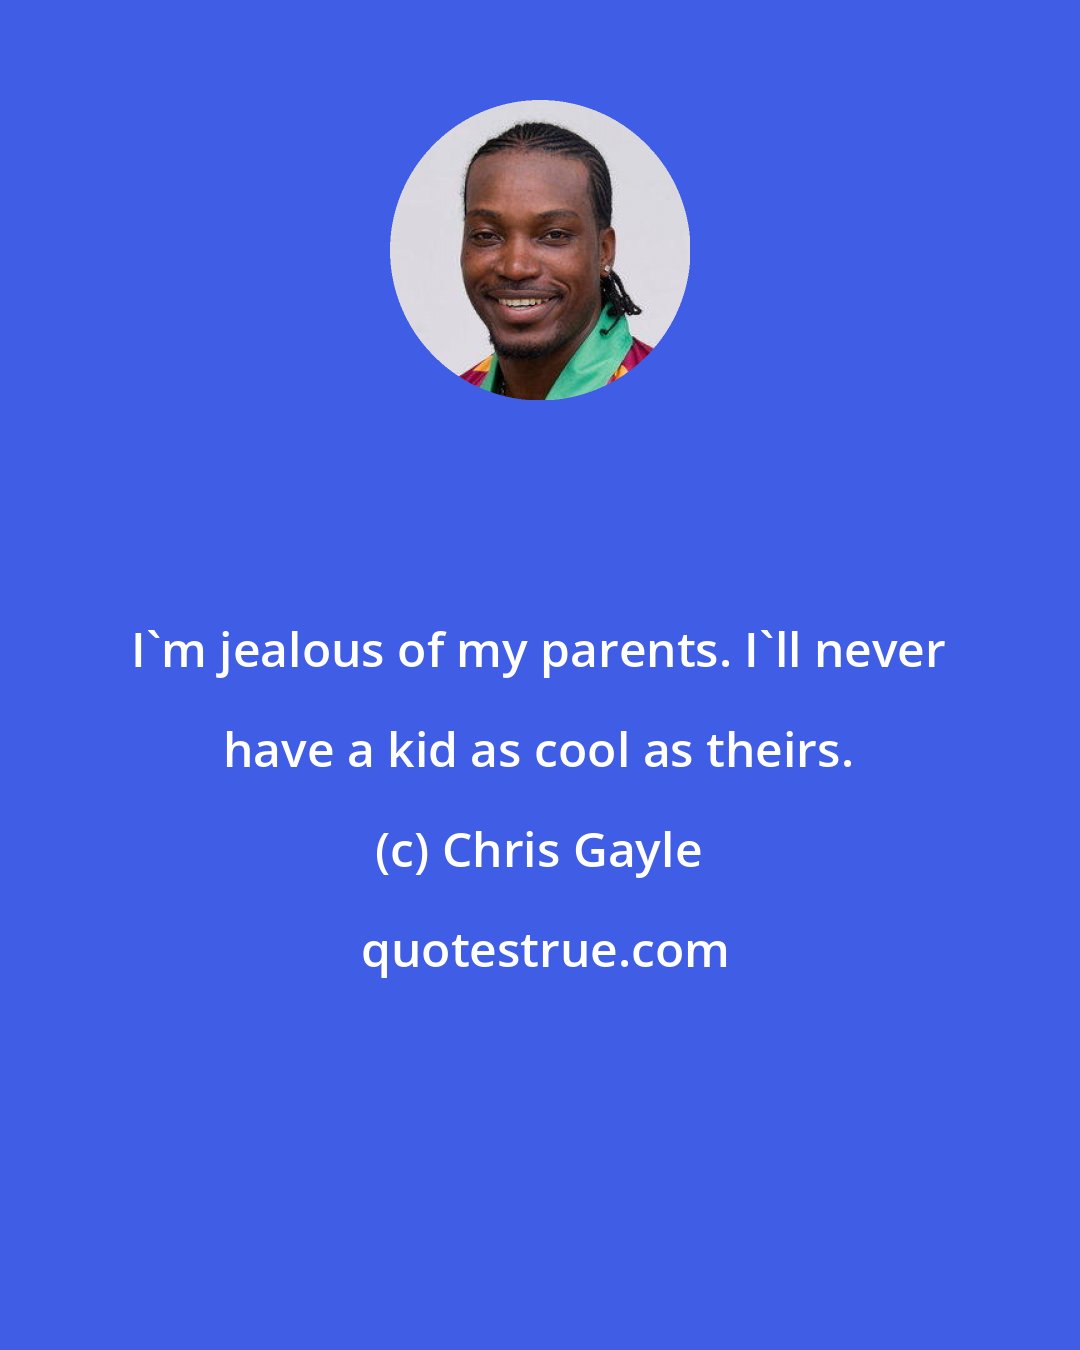 Chris Gayle: I'm jealous of my parents. I'll never have a kid as cool as theirs.